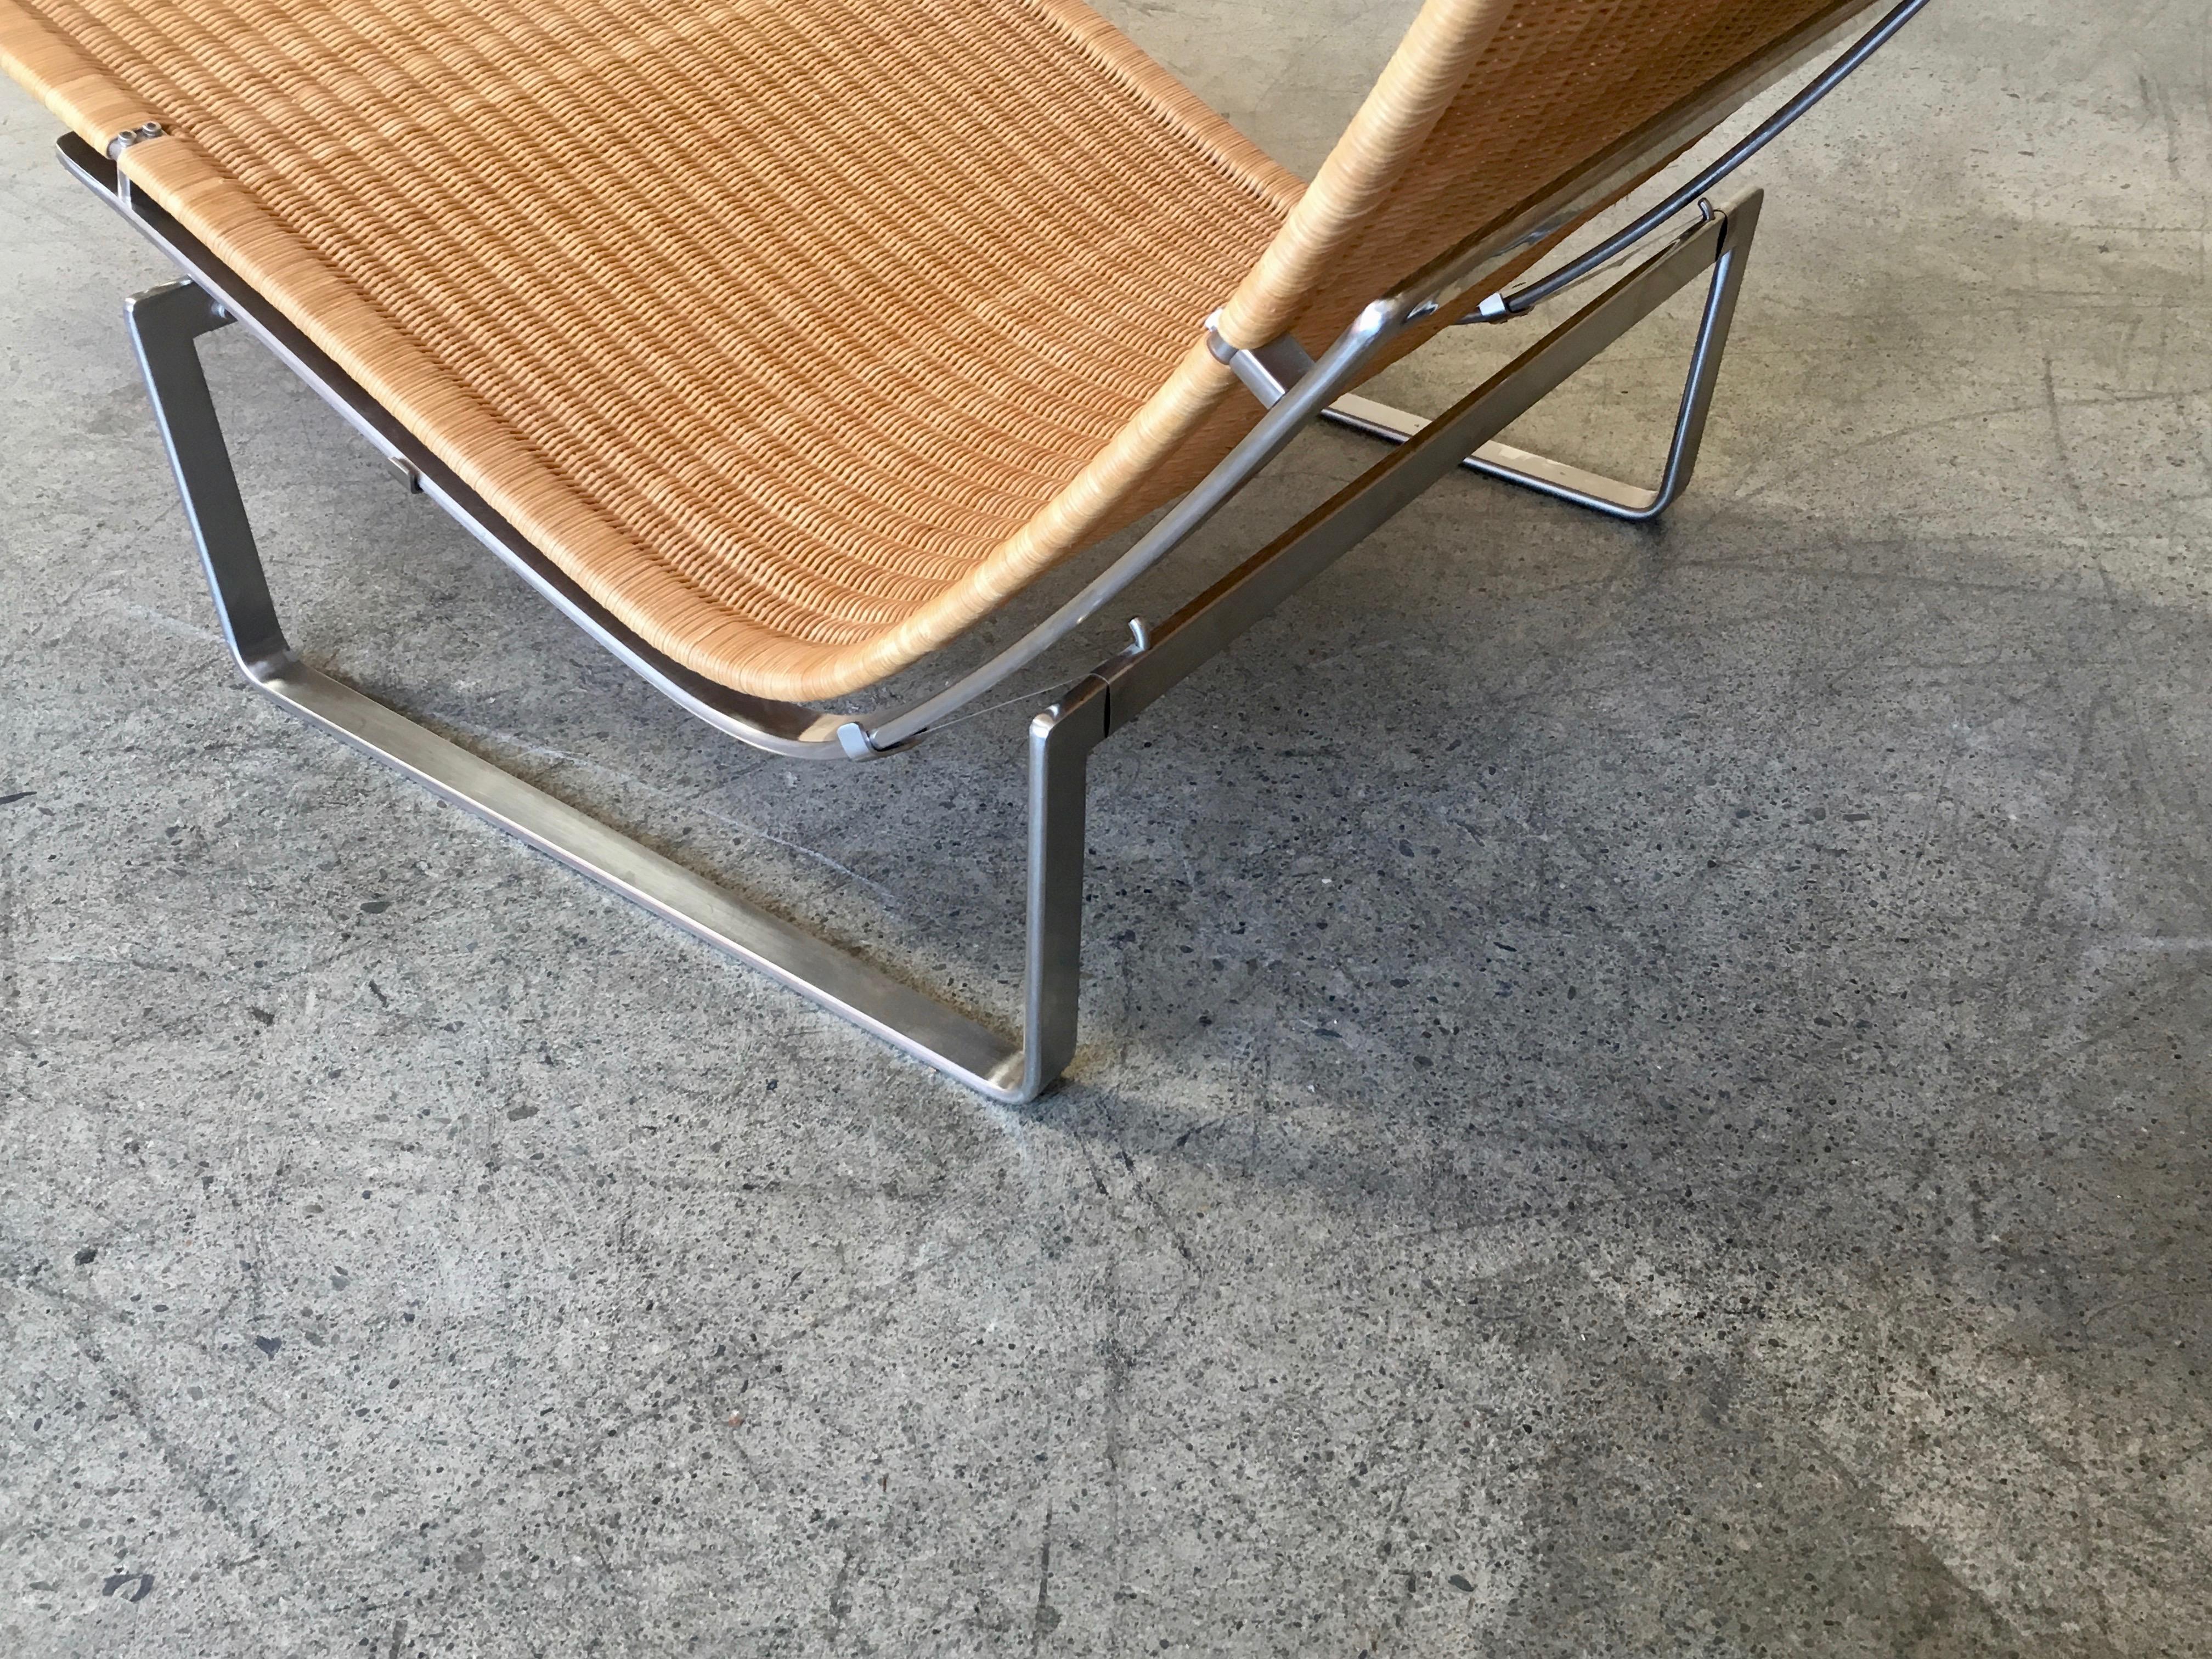 20th Century Poul Kjærholm PK 24 Chaise Lounge with Wicker Seat for Fritz Hansen